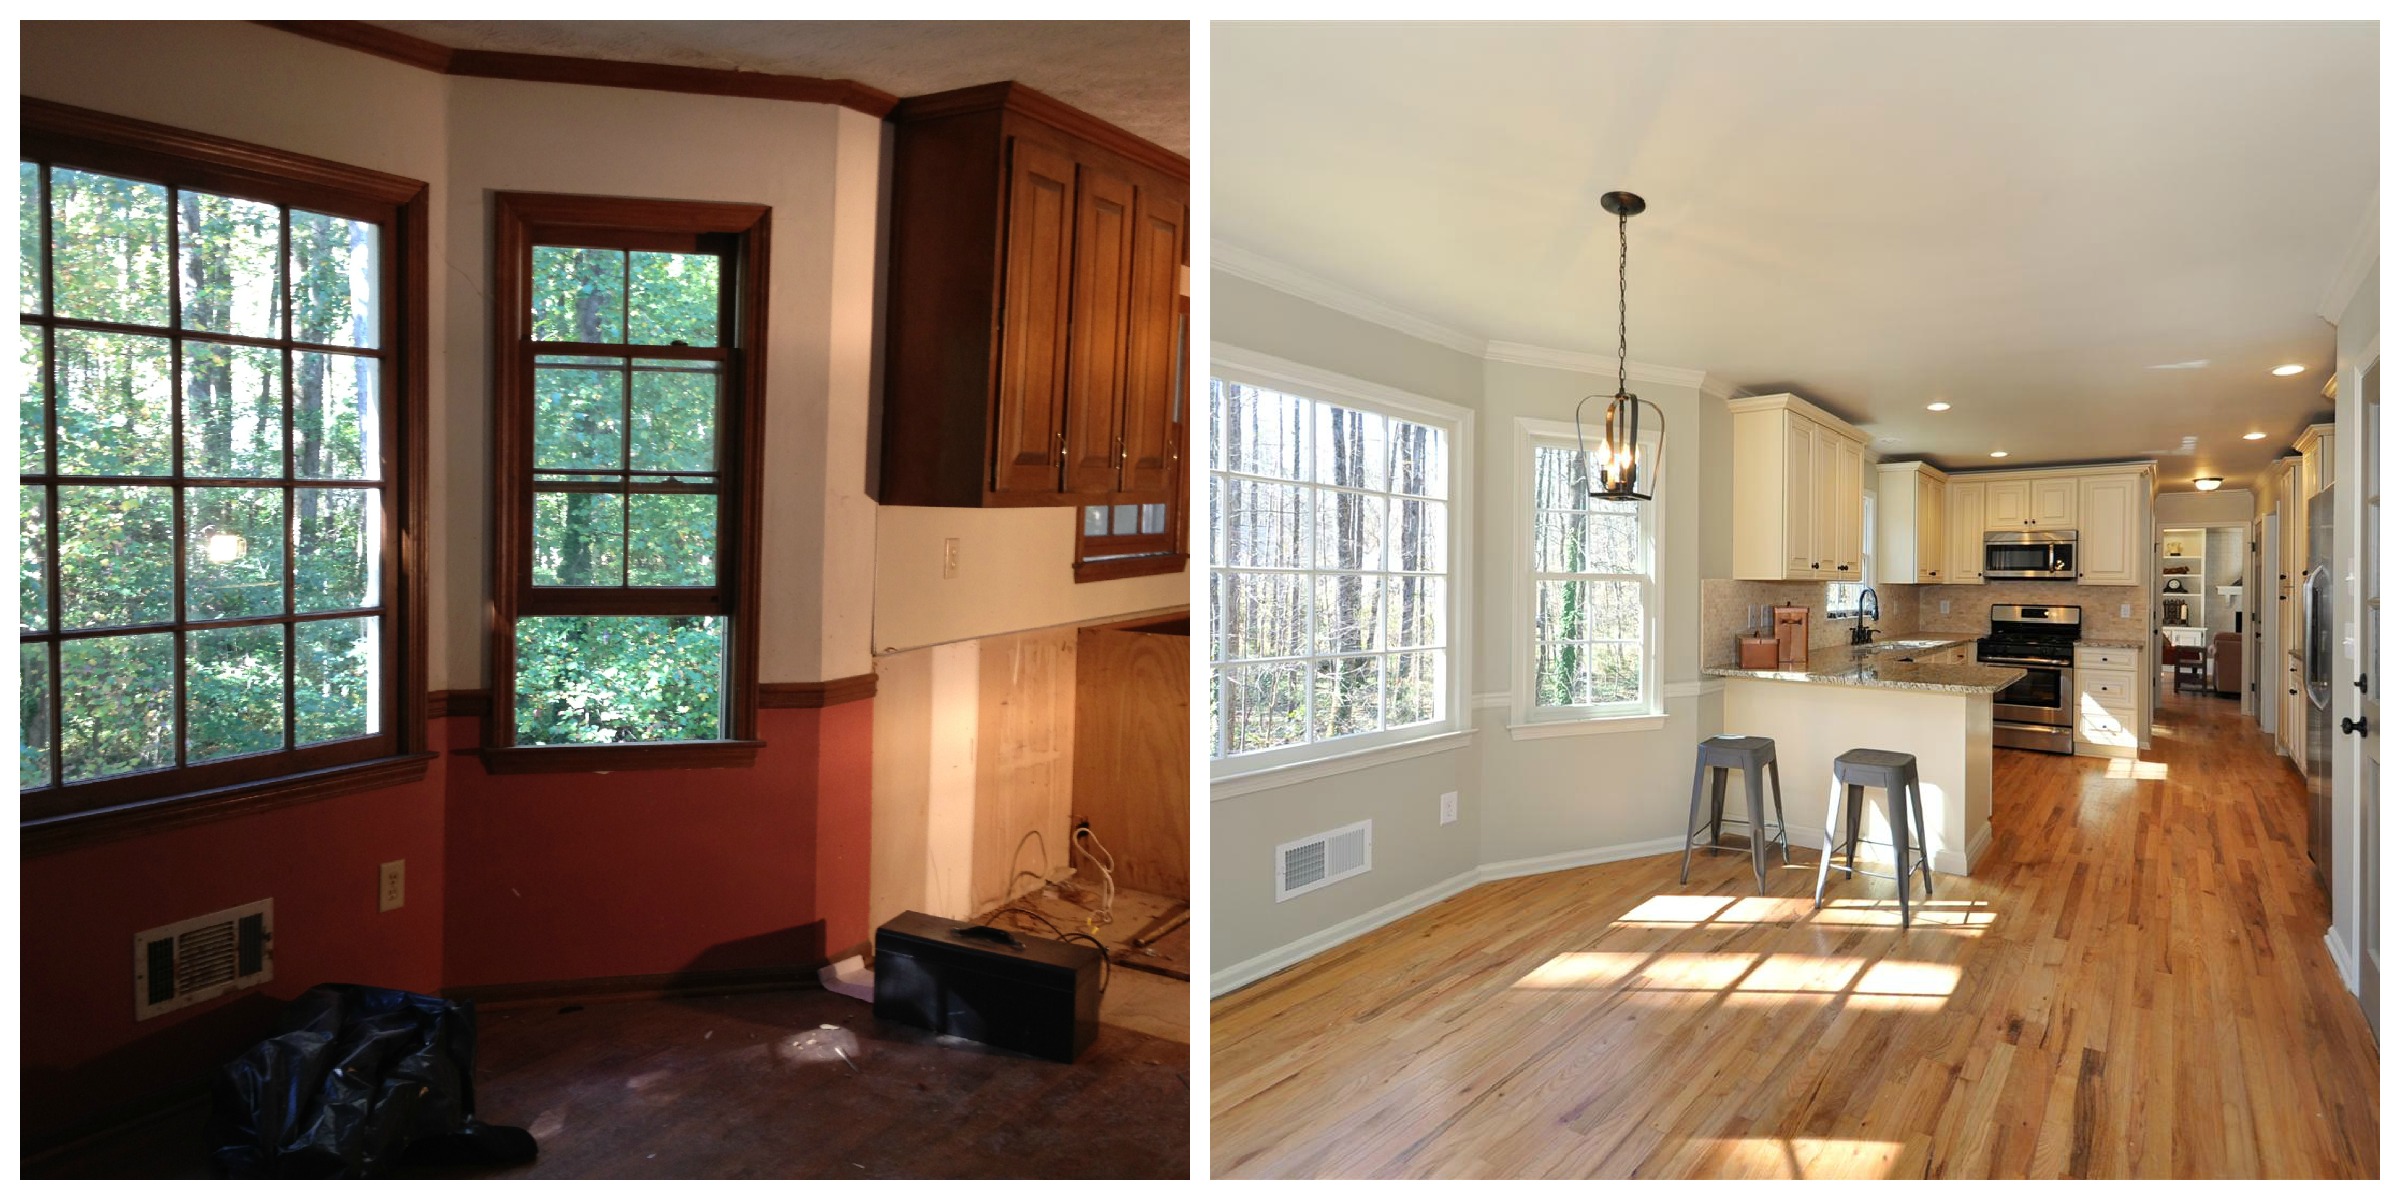 Breakfast nook before and after